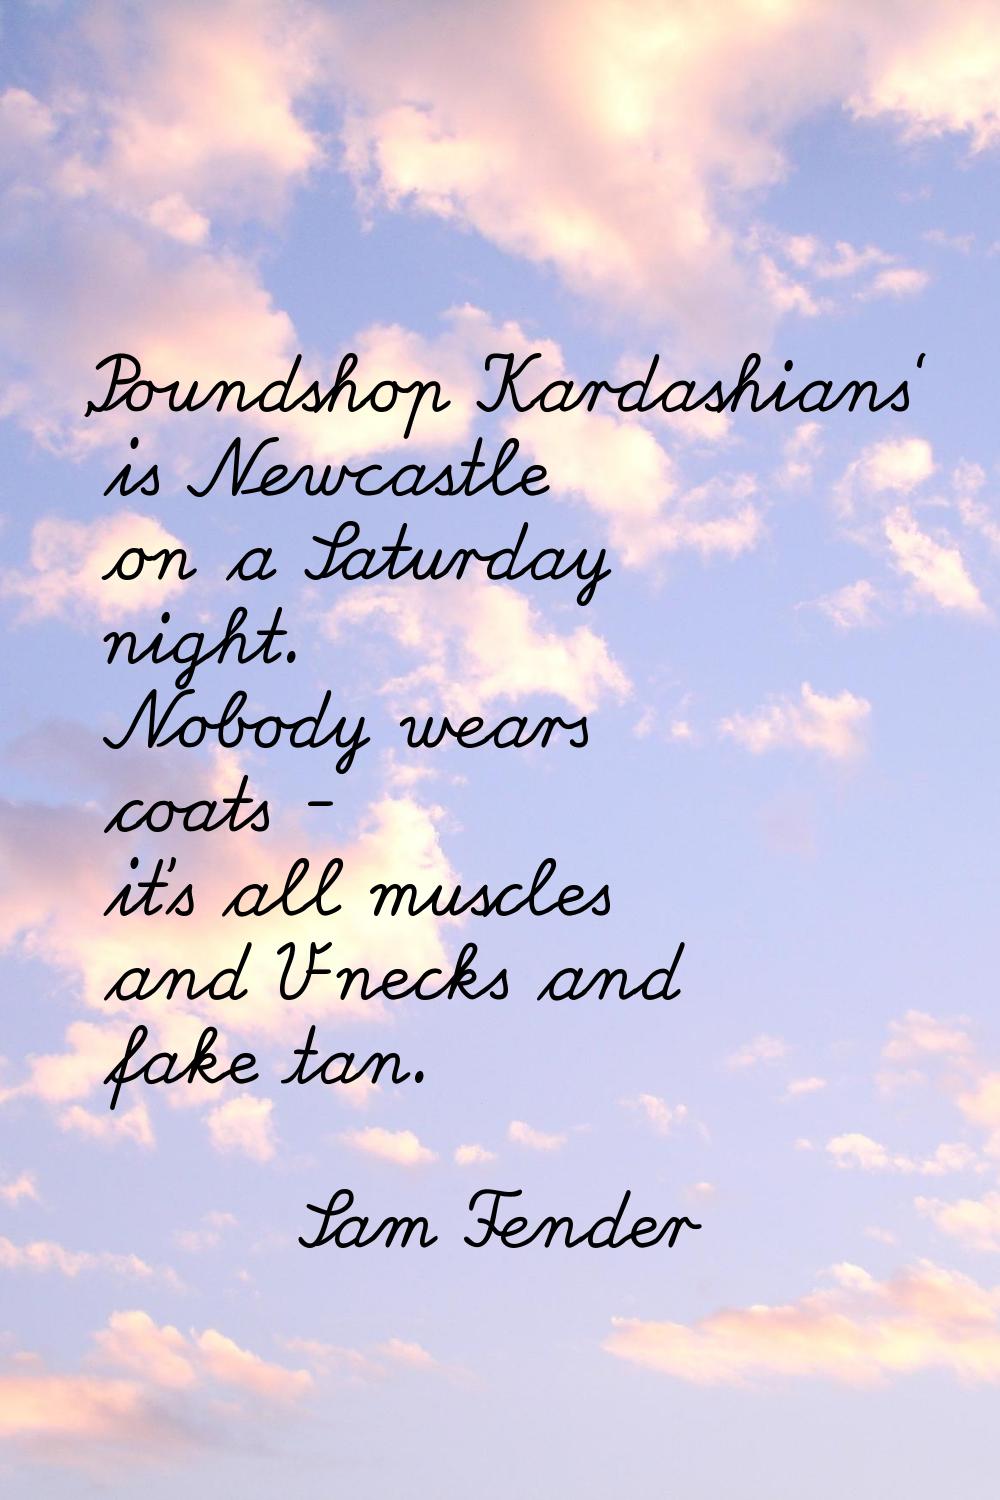 'Poundshop Kardashians' is Newcastle on a Saturday night. Nobody wears coats - it's all muscles and